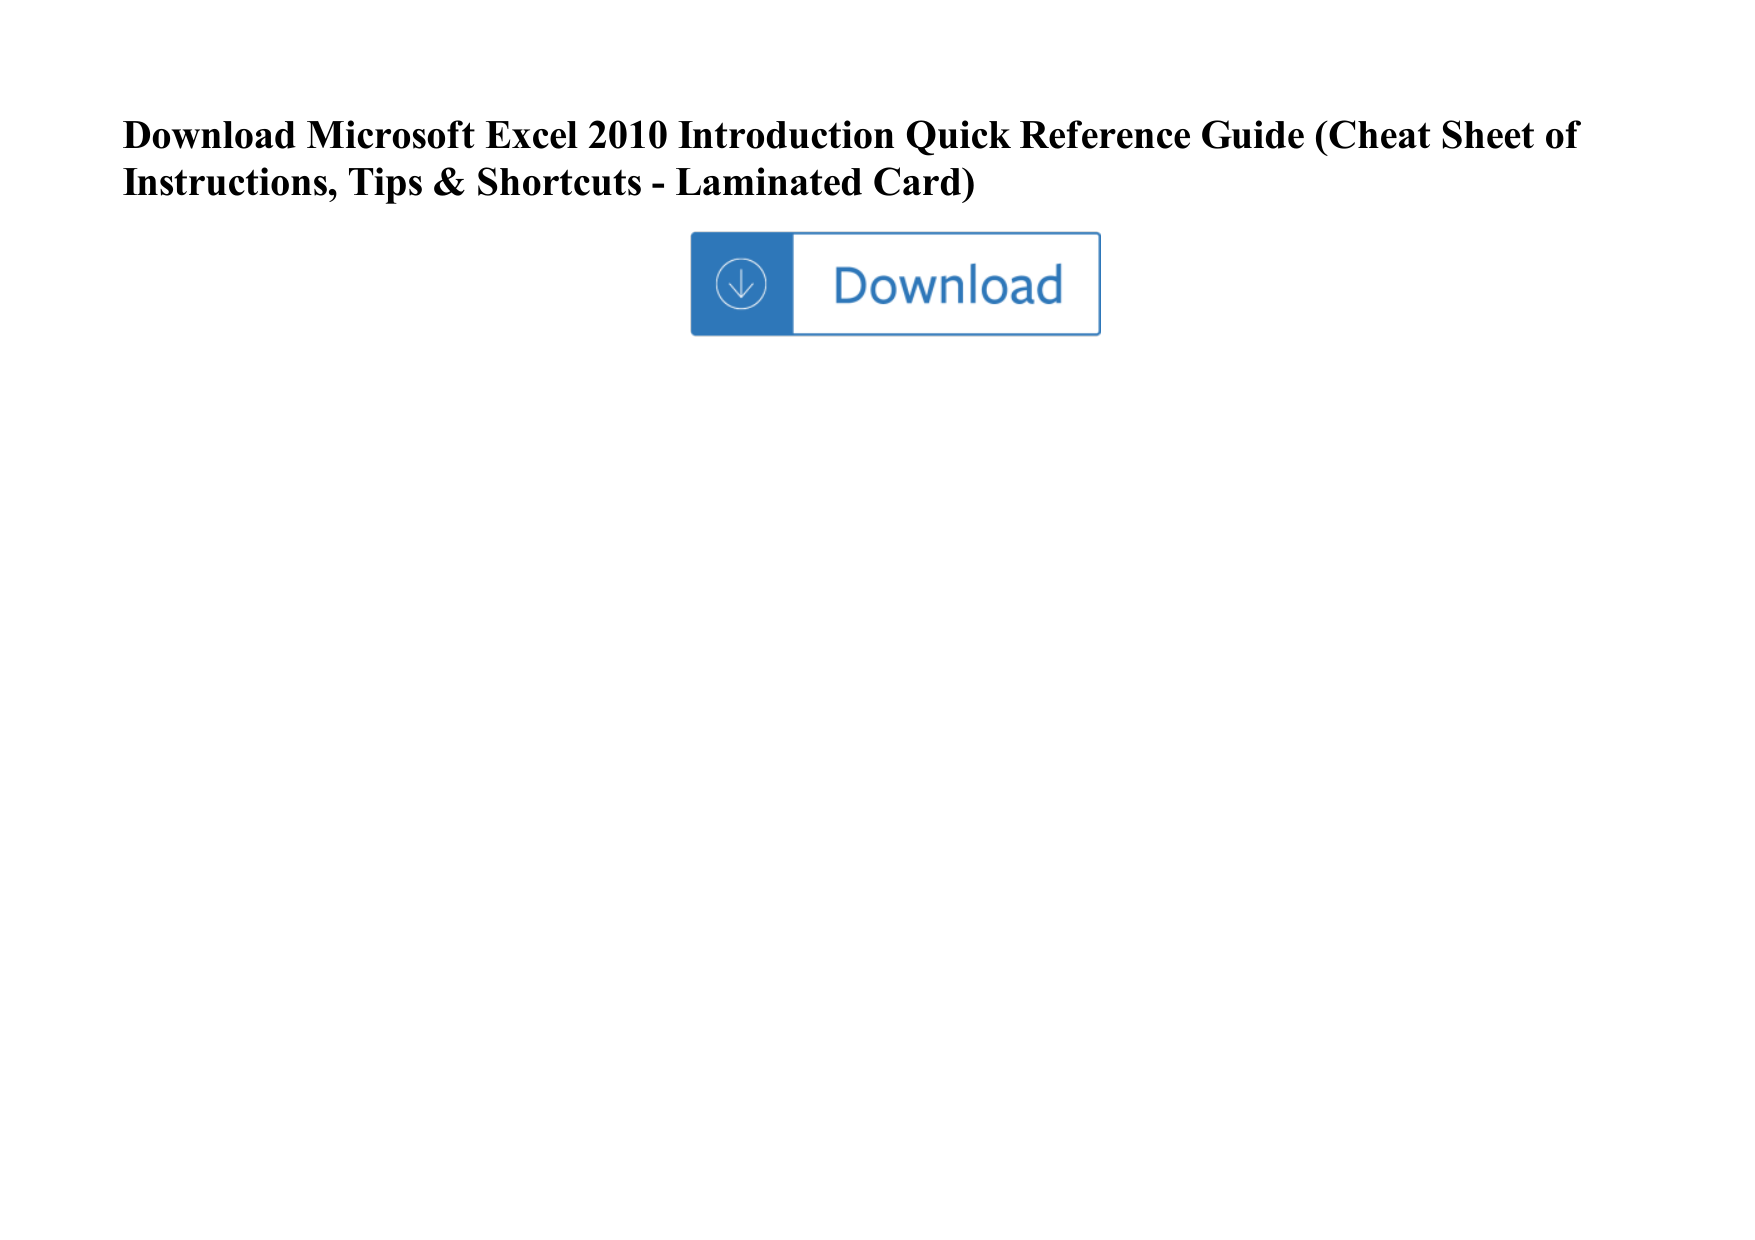 microsoft-excel-2010-introduction-quick-reference-guide-cheat-sheet-of-instructions-tips